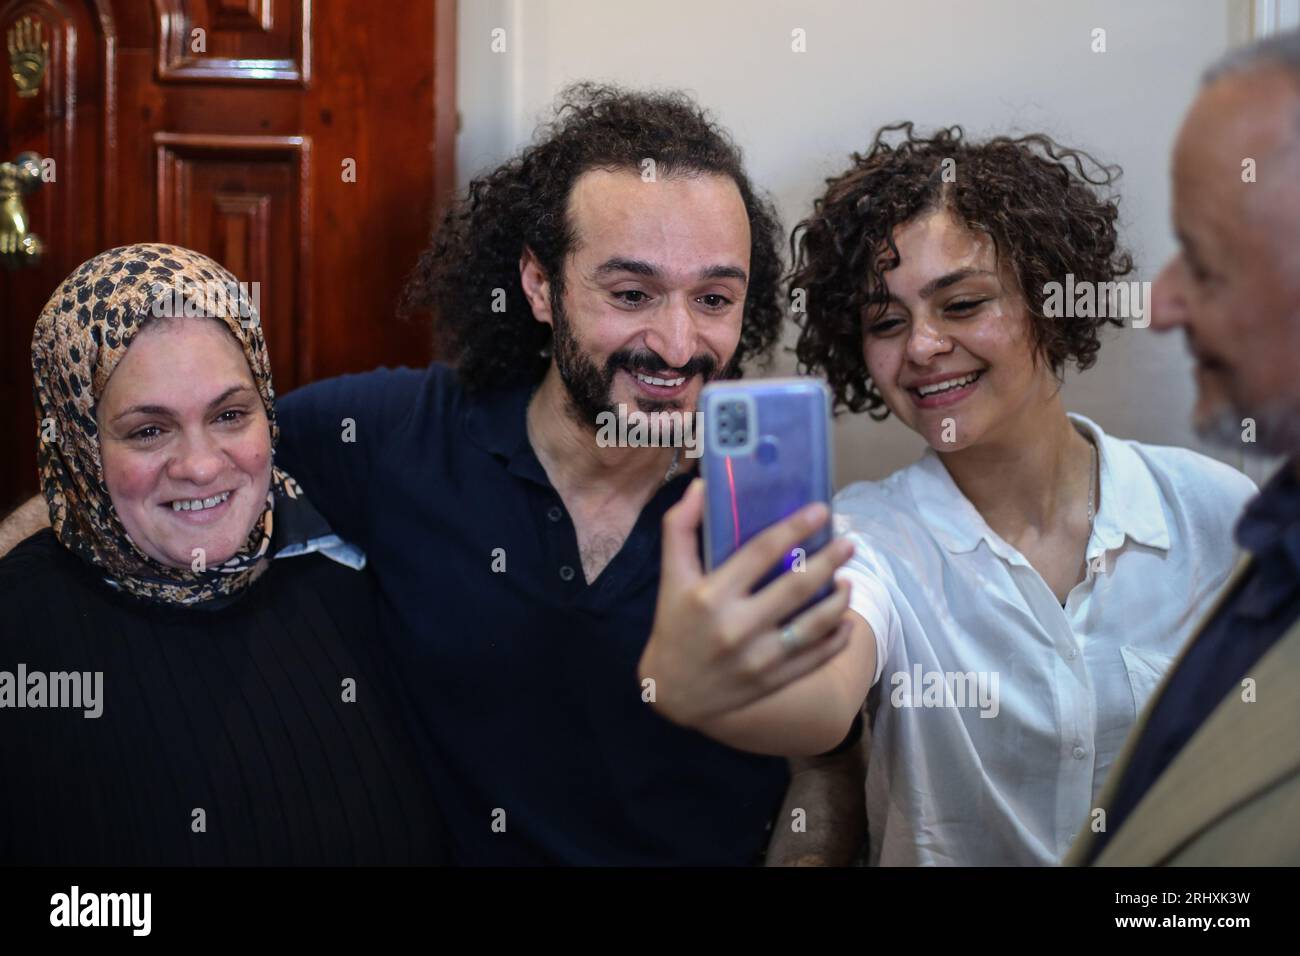 Cairo, Egypt. 19th Aug, 2023. Egyptian pro-democracy activist Ahmed Douma, who who has been imprisoned since December 2013, is welcomed by relatives following his release by a presidential pardon. Egyptian President Abdel-Fattah al-Sissi has pardoned several prisoners including prominent pro-democracy campaigner Ahmed Douma, a key figure in Egypt's 2011 popular uprising that forced long-time president Hosny Mubarak to step down, after spending nearly 10 years behind bars. Credit: Mohamed El Raai/dpa/Alamy Live News Stock Photo